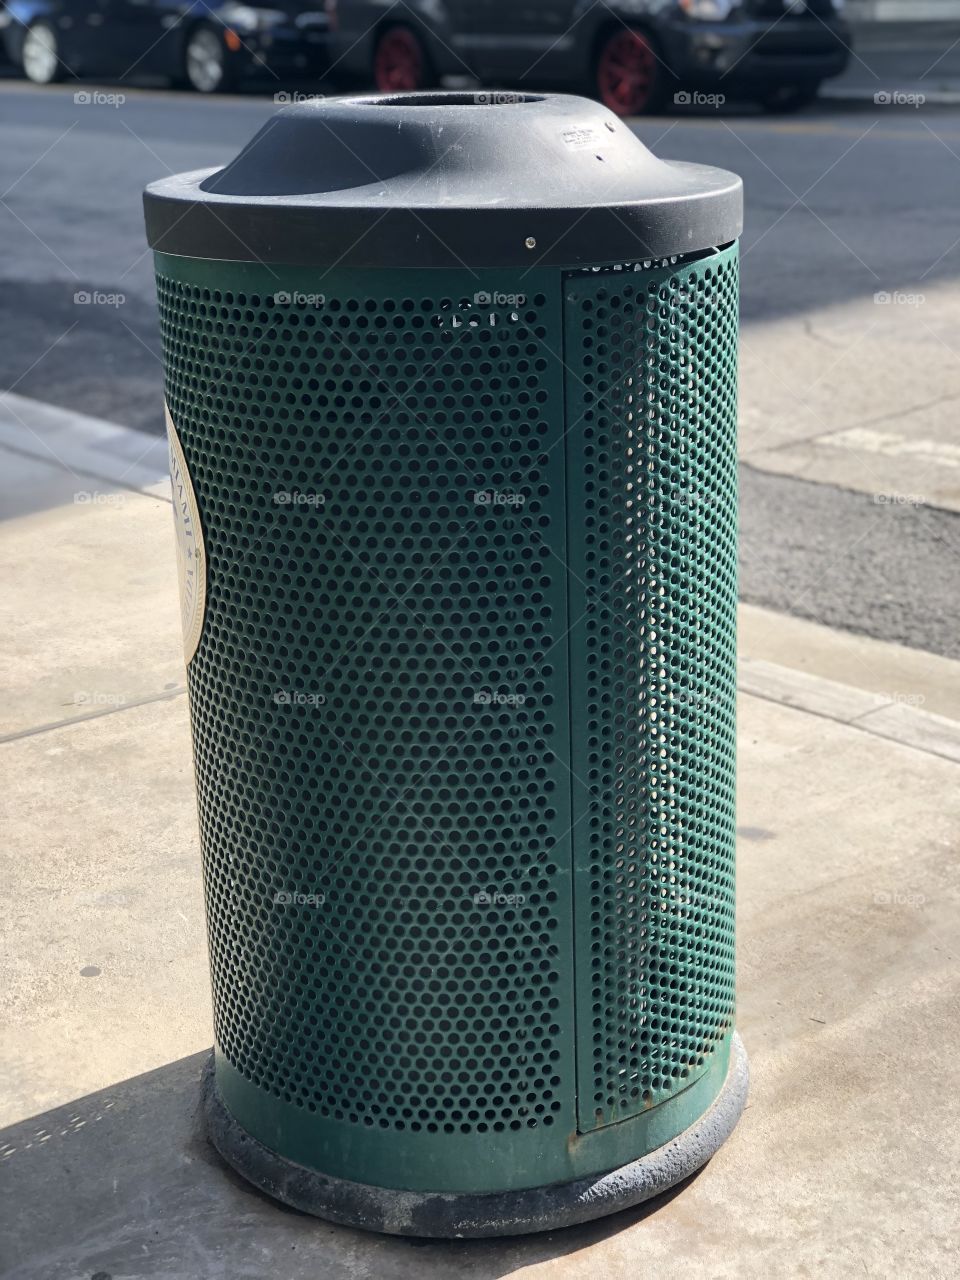 Garbage can on the streeside